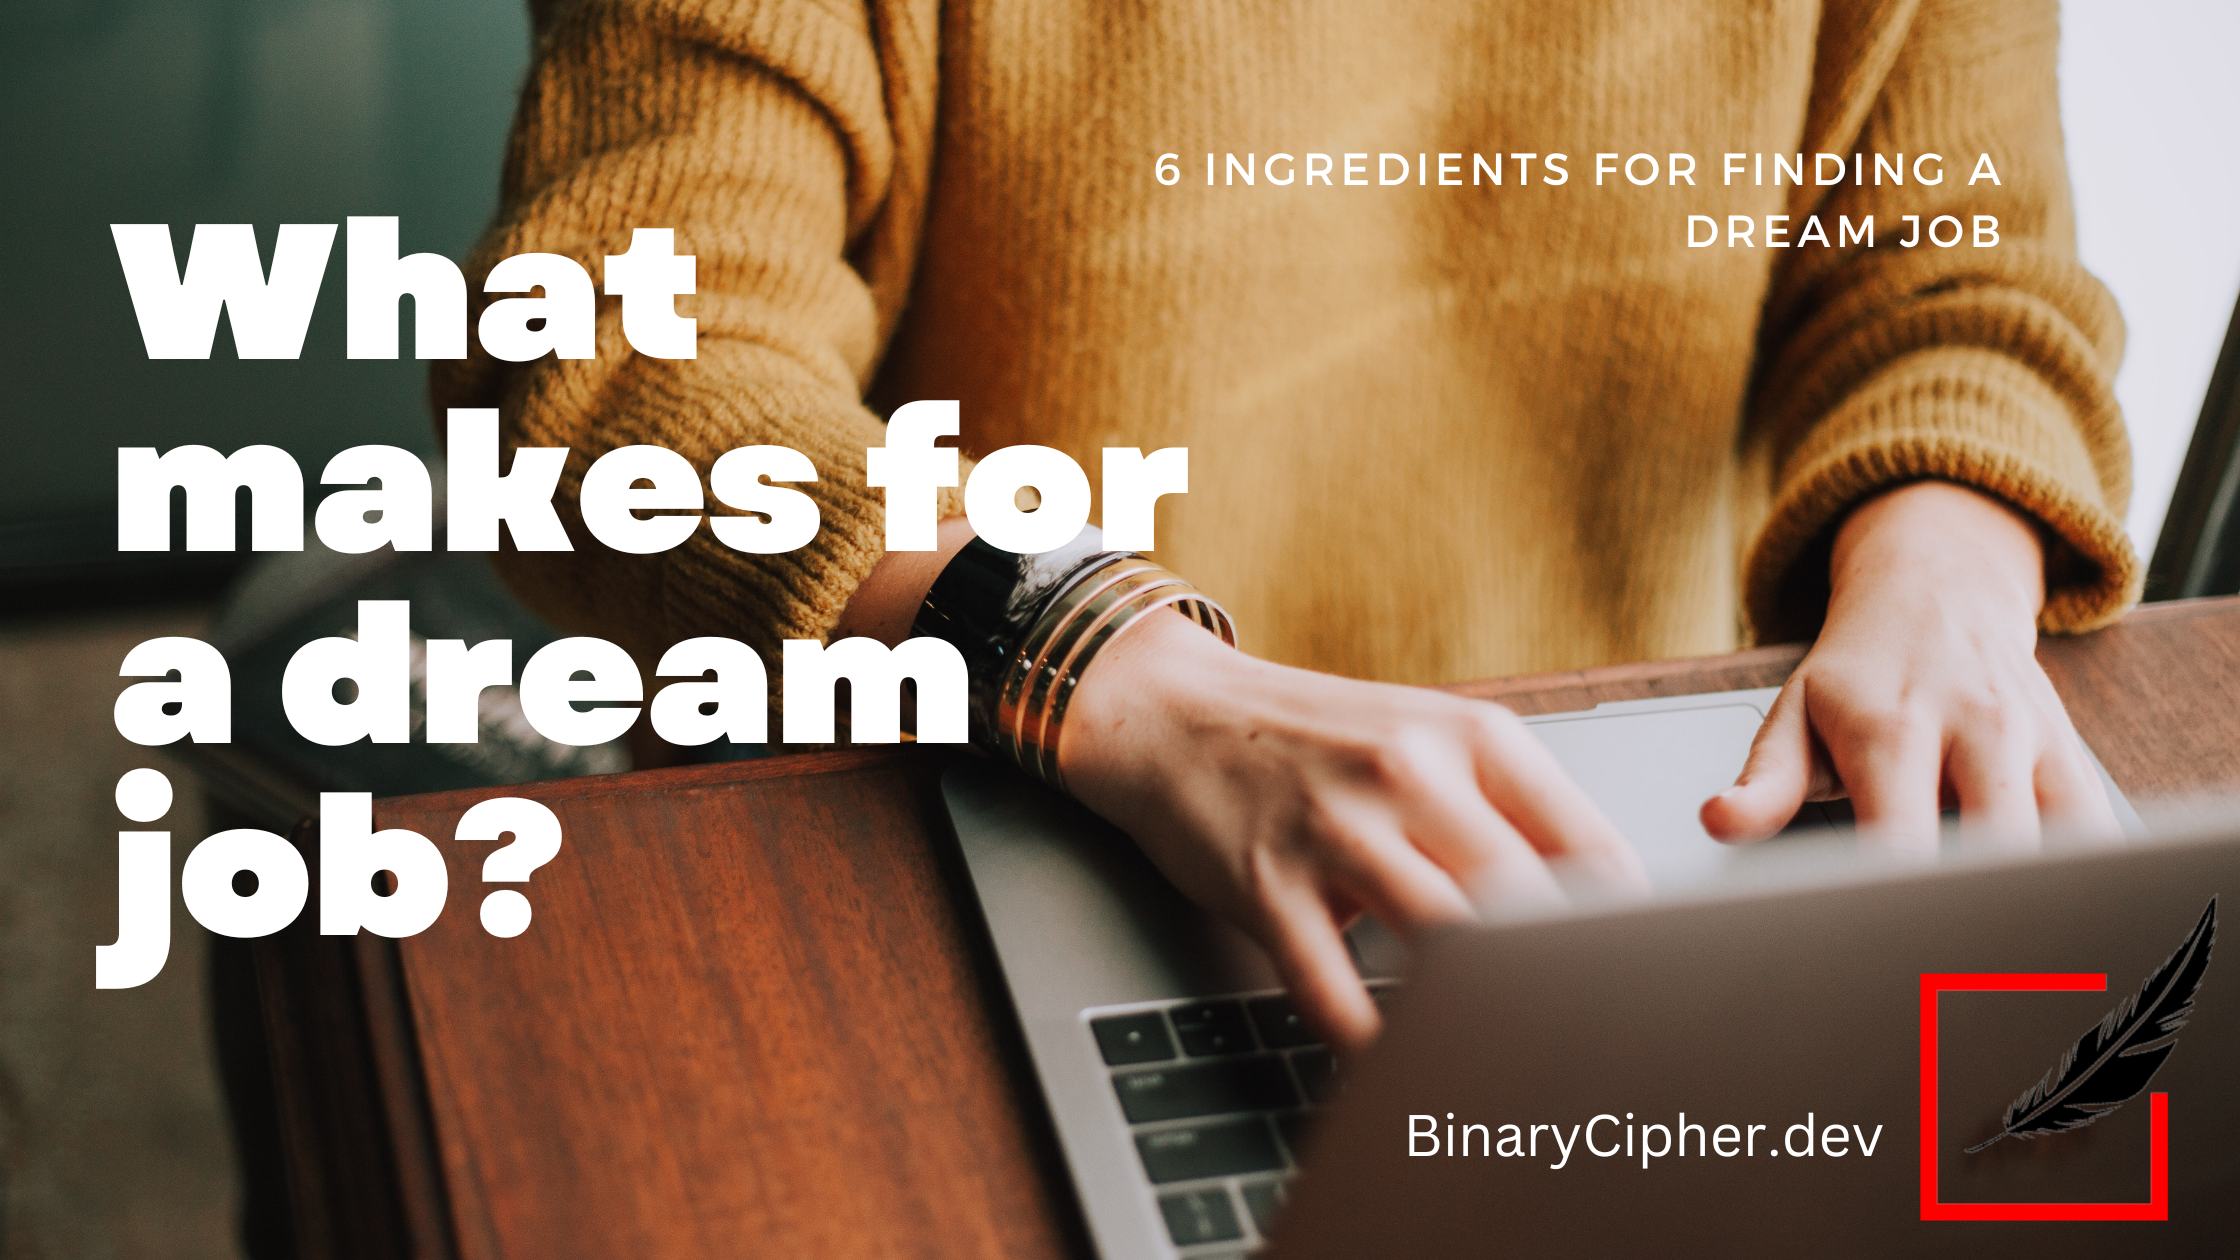 What makes for a dream job